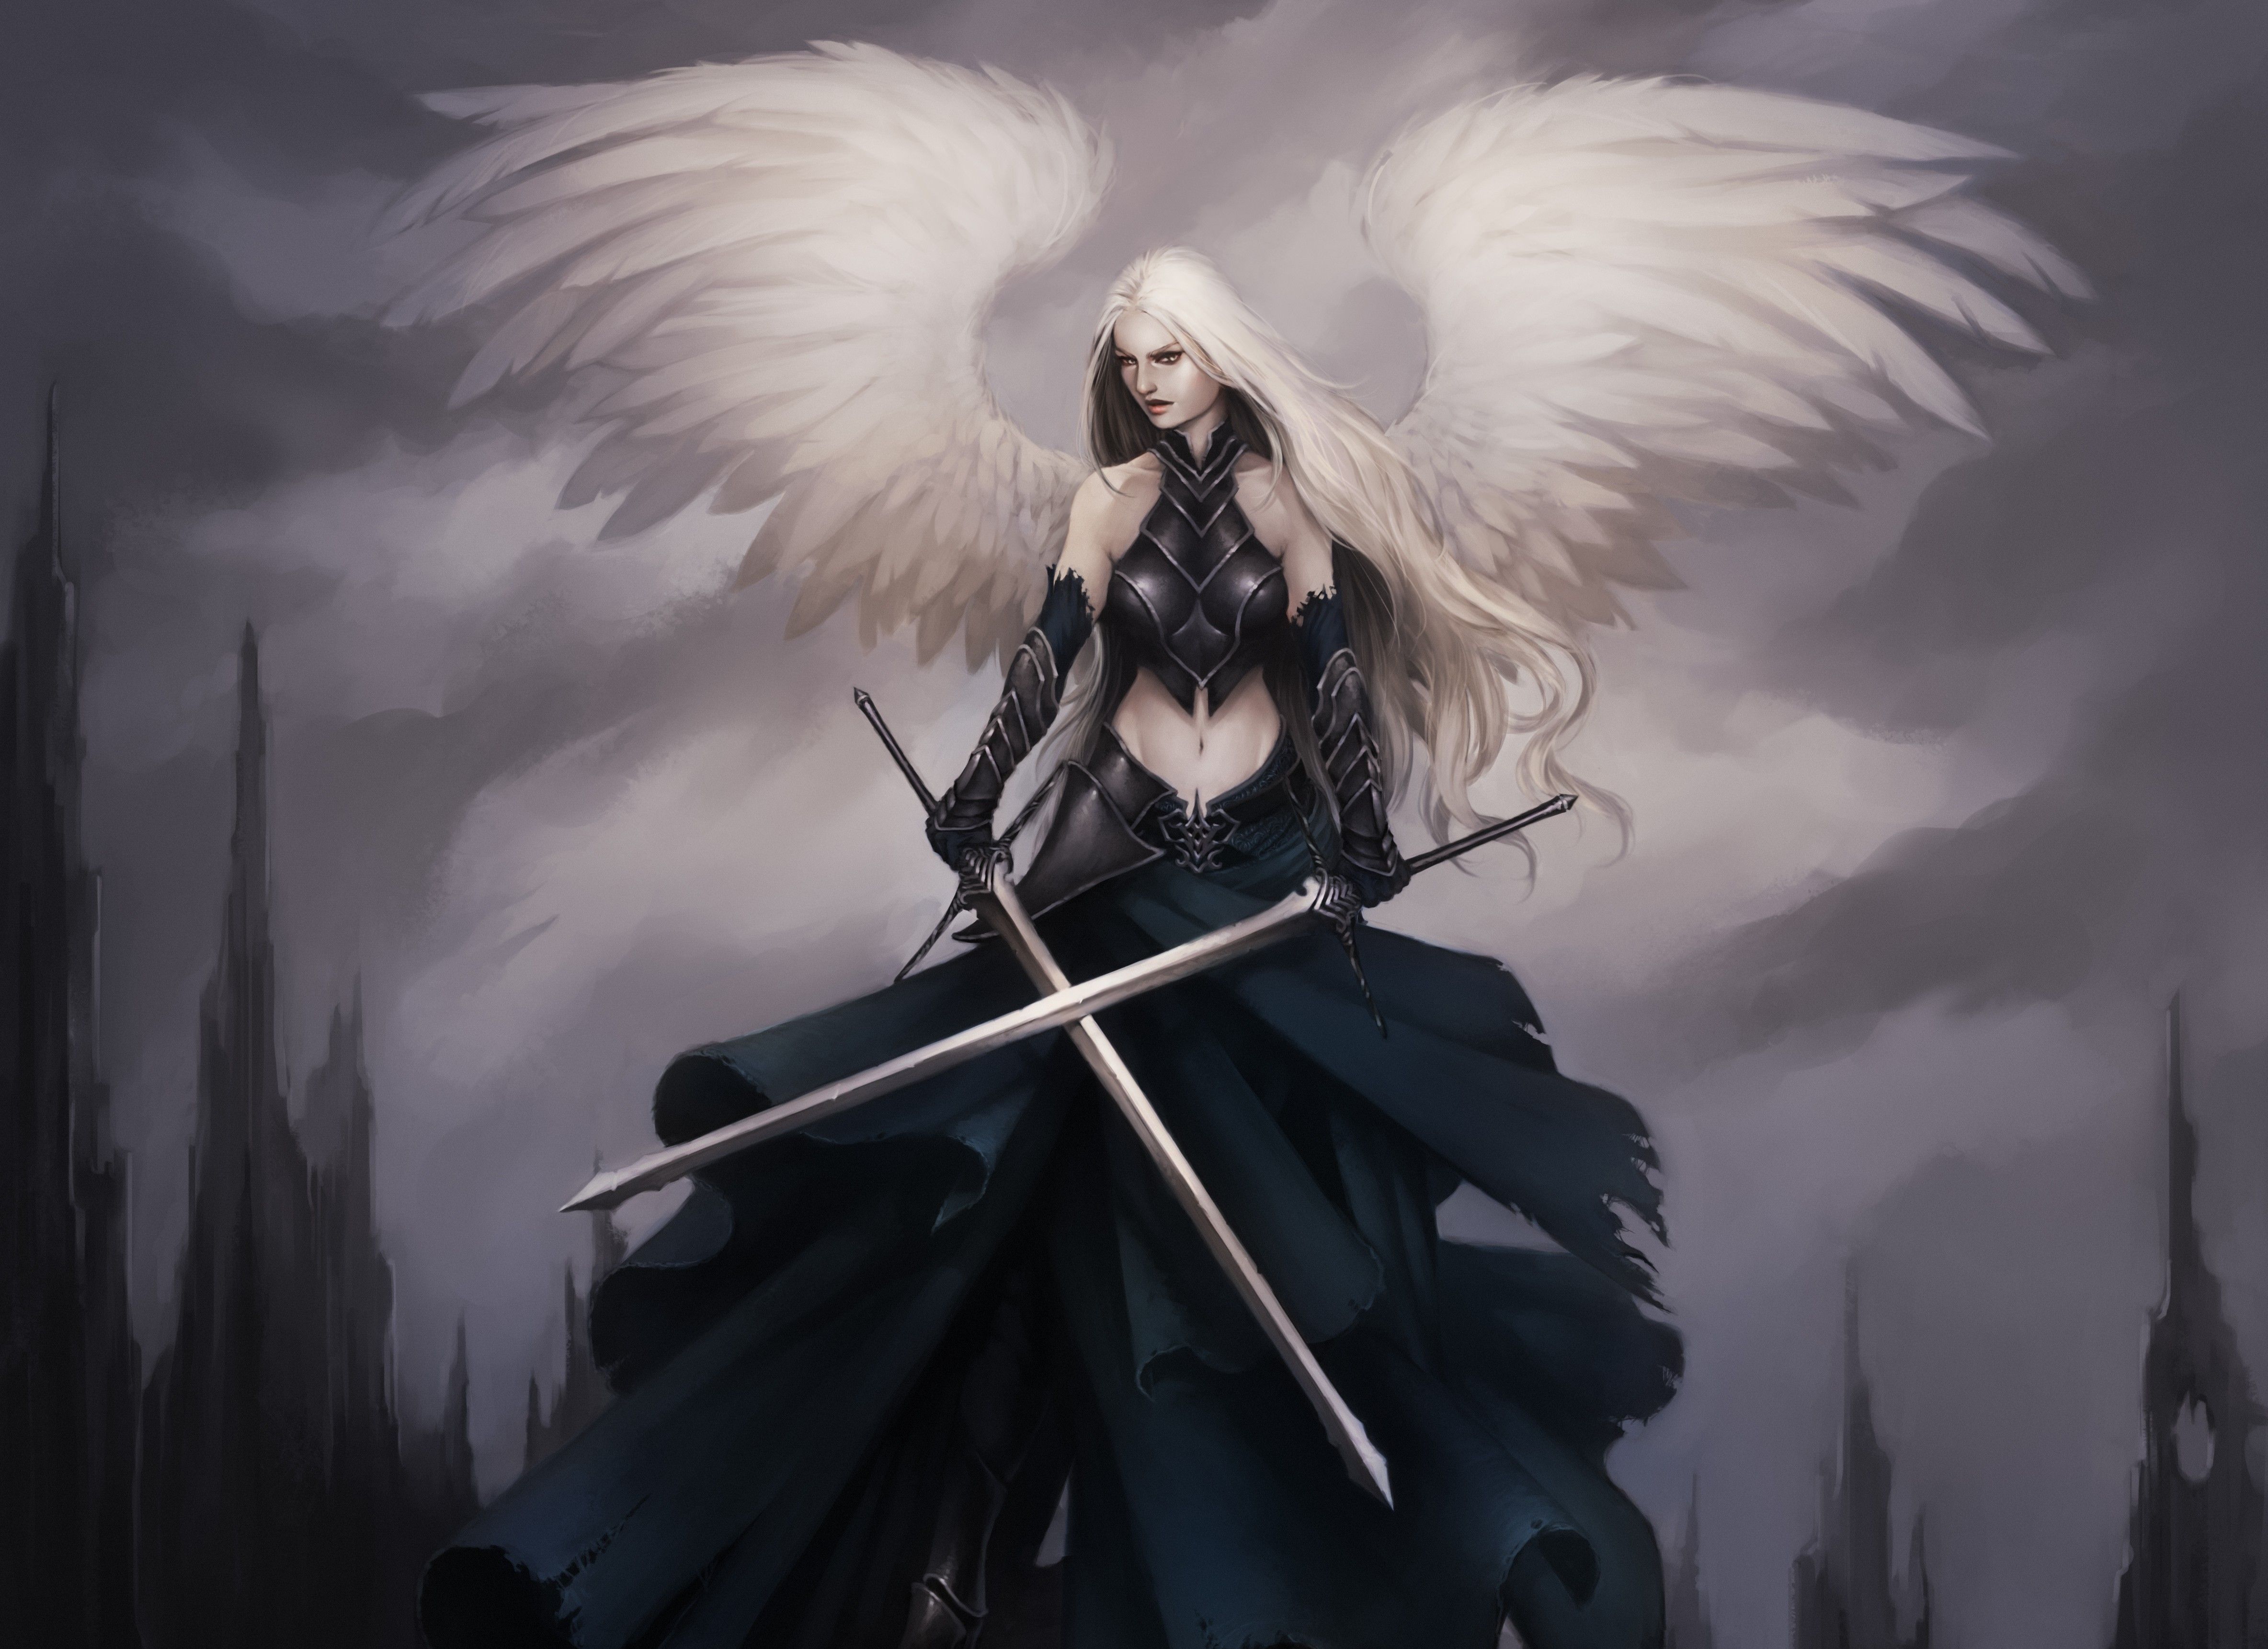 Gothic Female Angels Chained Up. Angel Warrior Sword Wings Armor